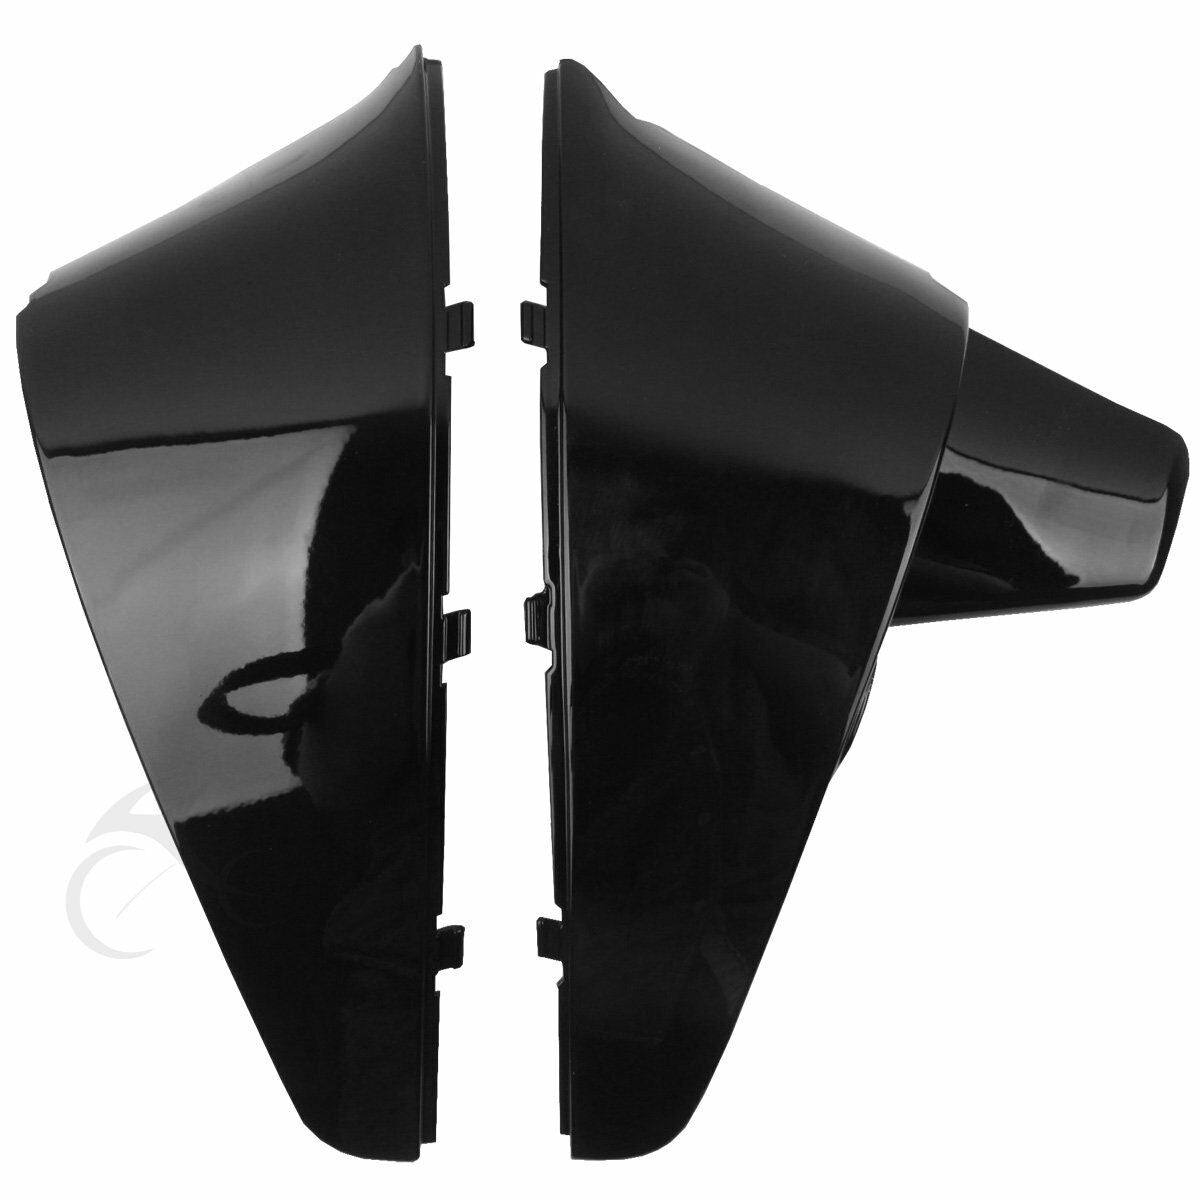 ABS Battery side Fairing Cover Fit For Honda Shadow VT600 VLX 600 STEED400 88-98 - Moto Life Products